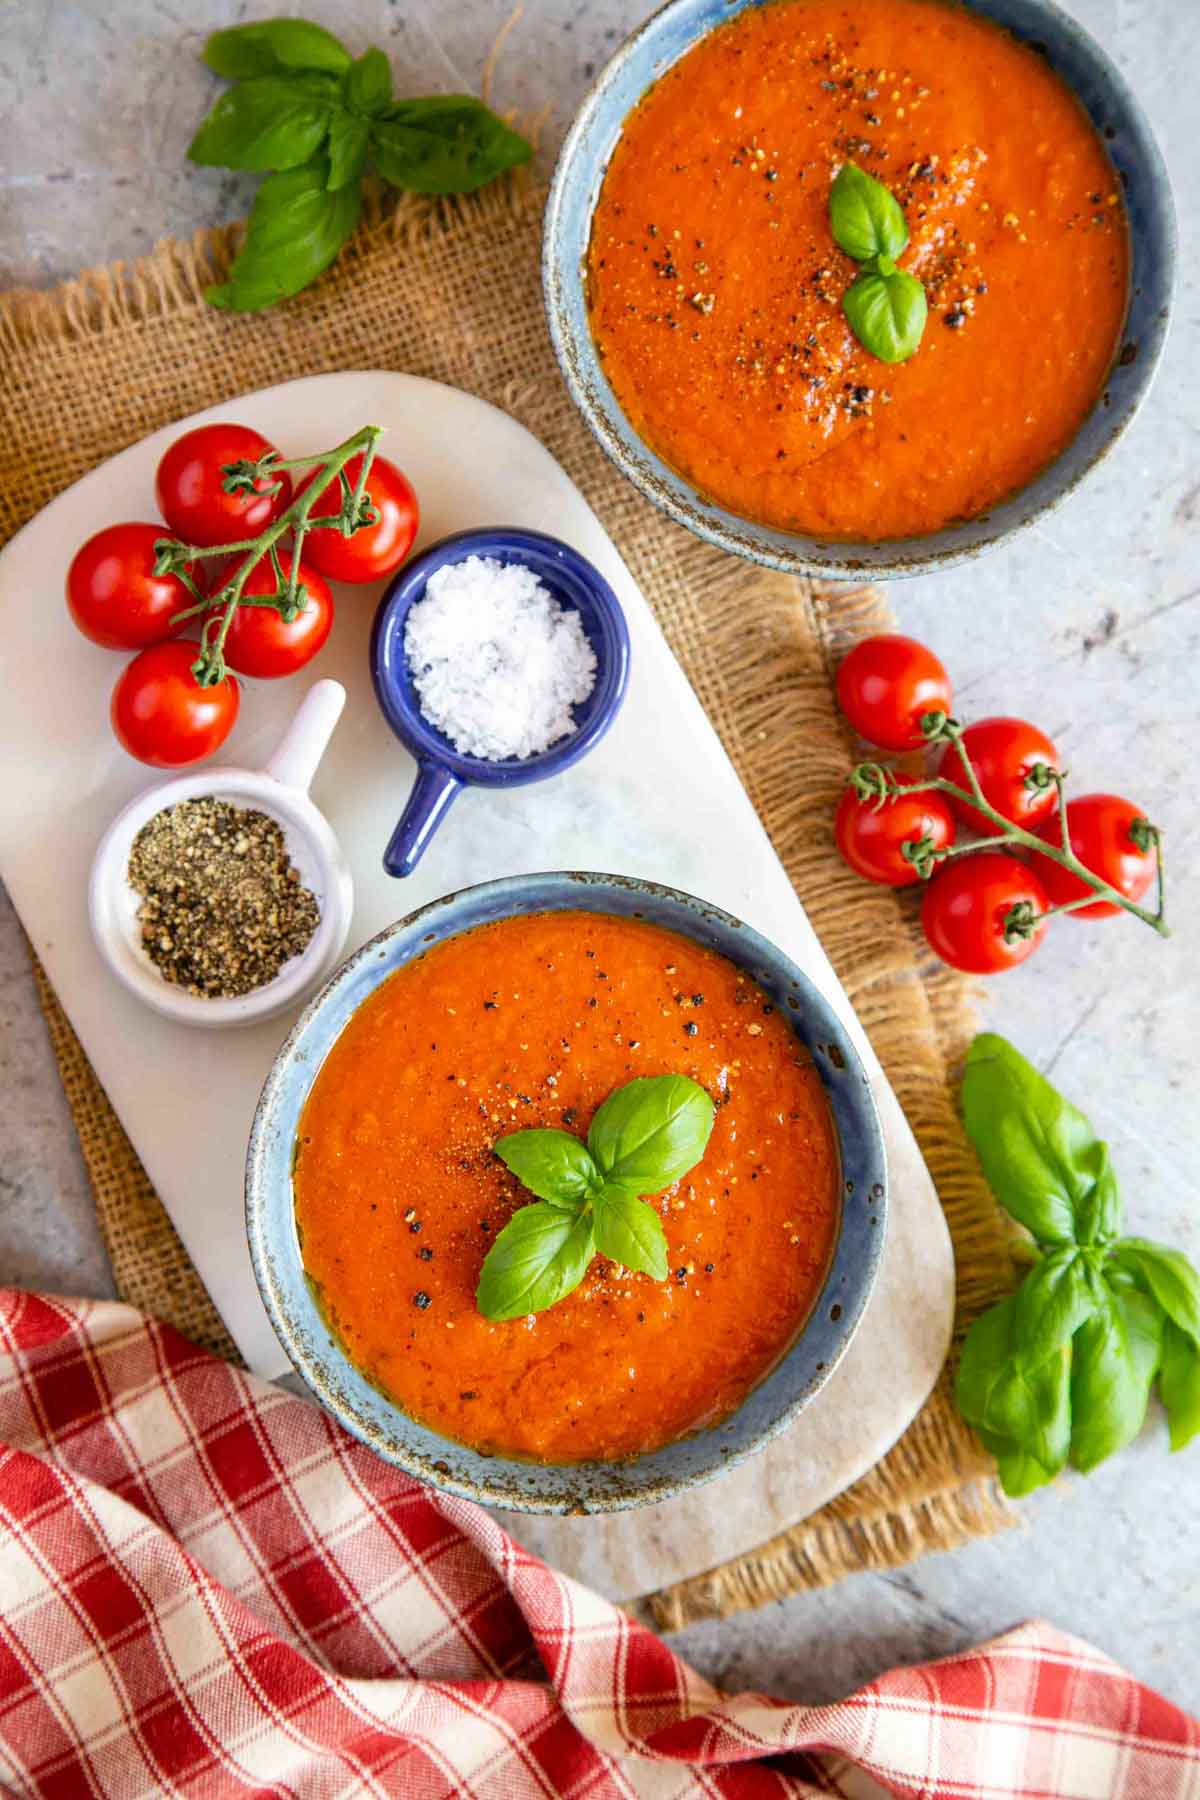 Lunch is served: two bowls of pressure cooker tomato soup shown on the table from above.